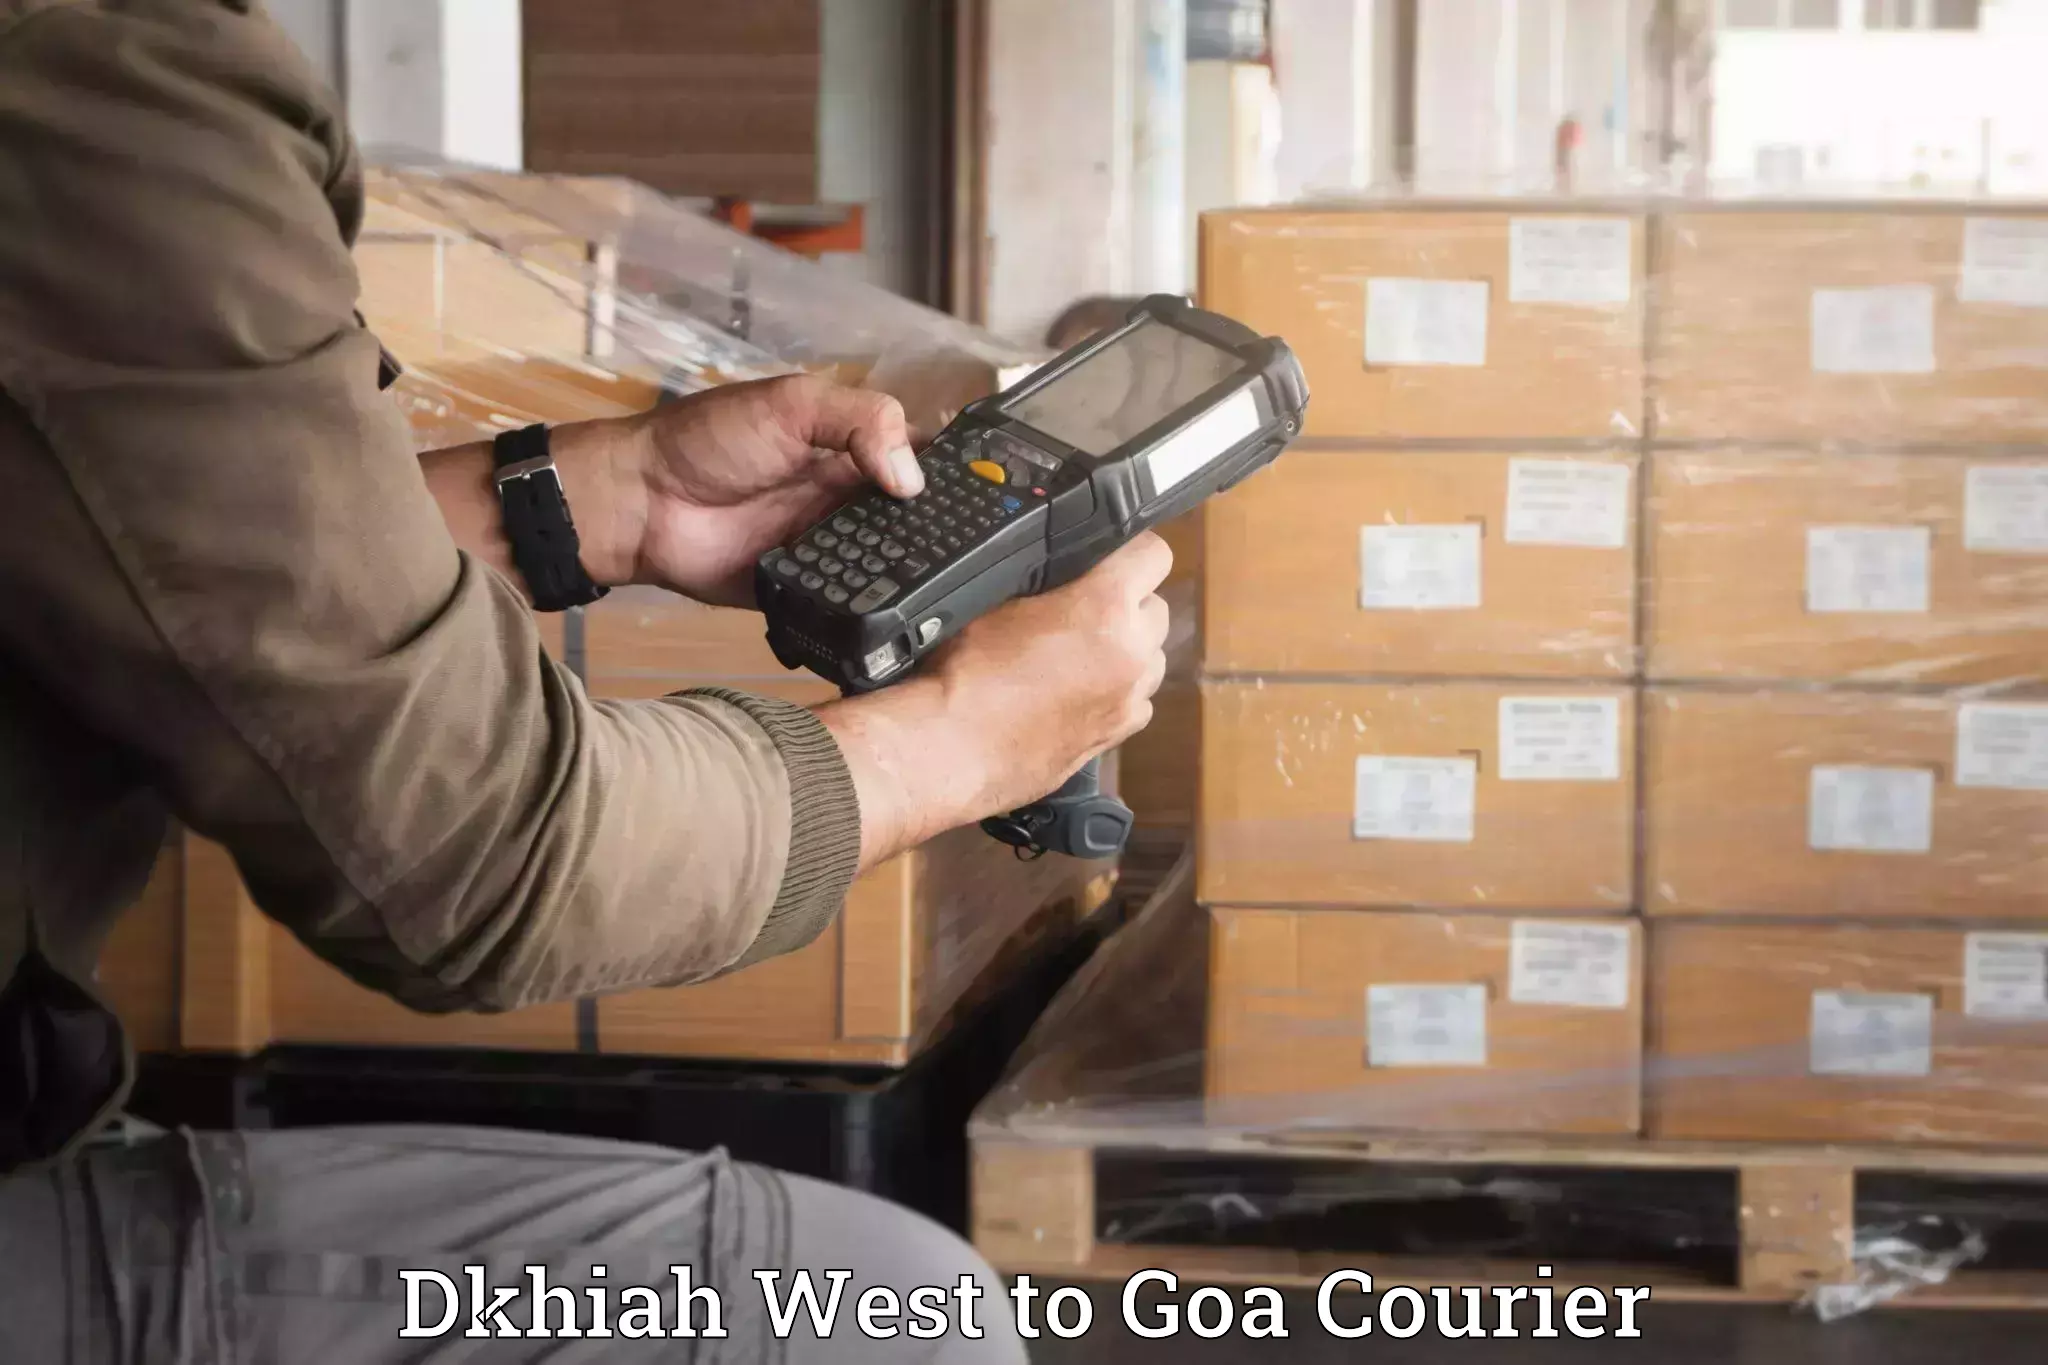 Train station baggage courier in Dkhiah West to Goa